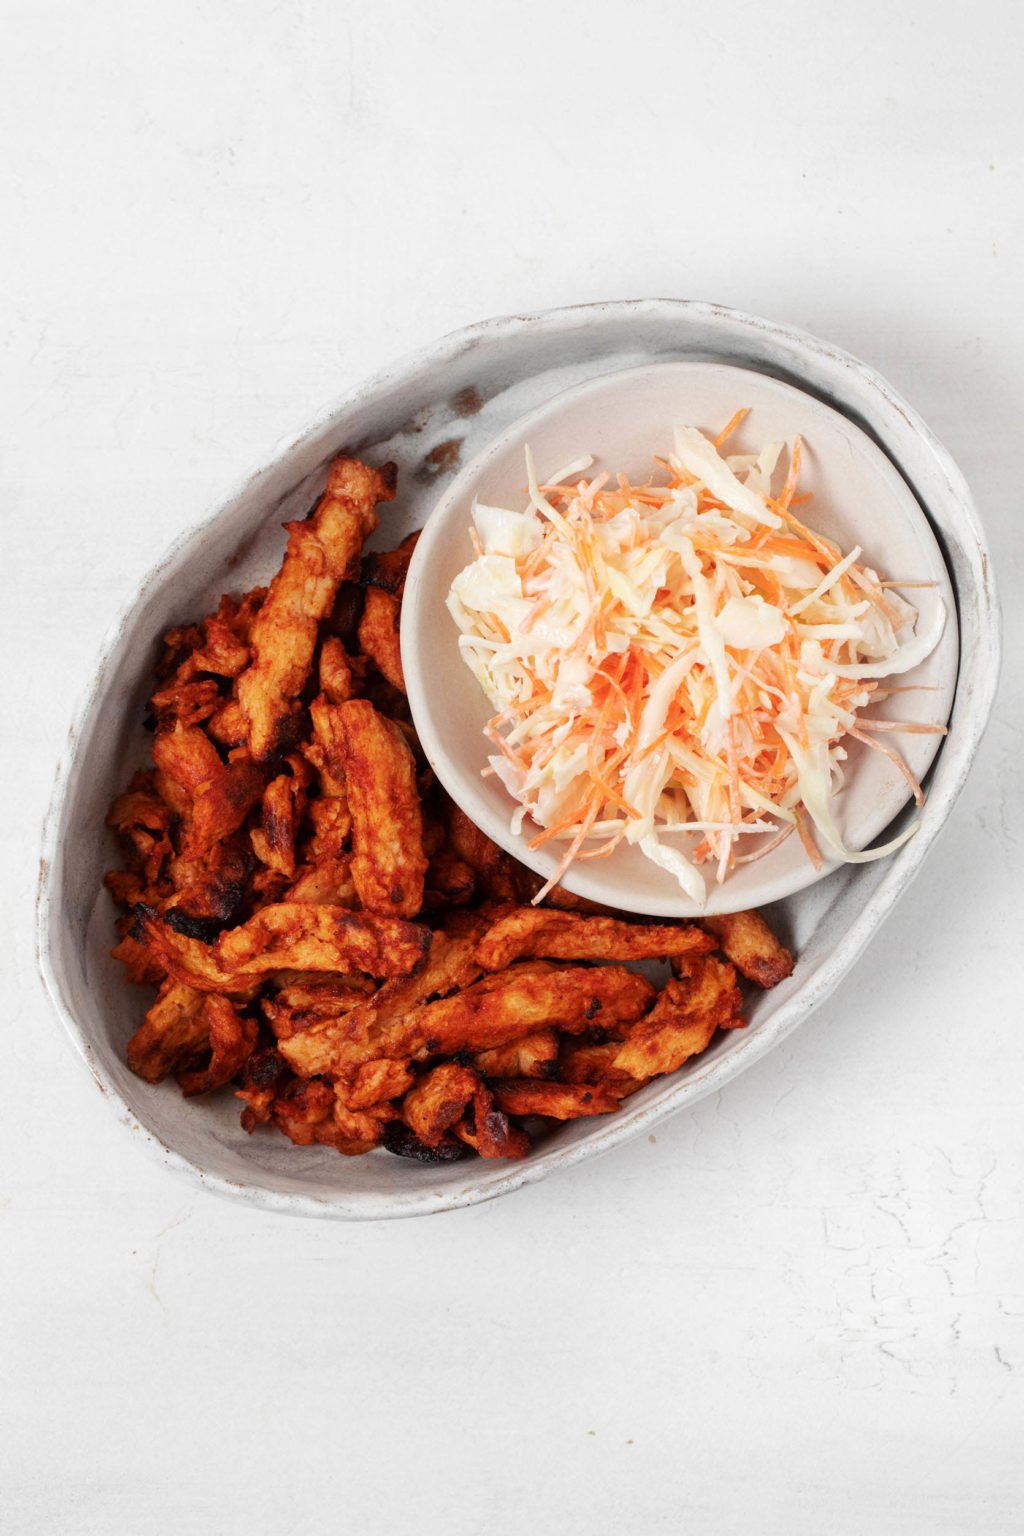 A vegan protein is being served on a small, oval platter with coleslaw.